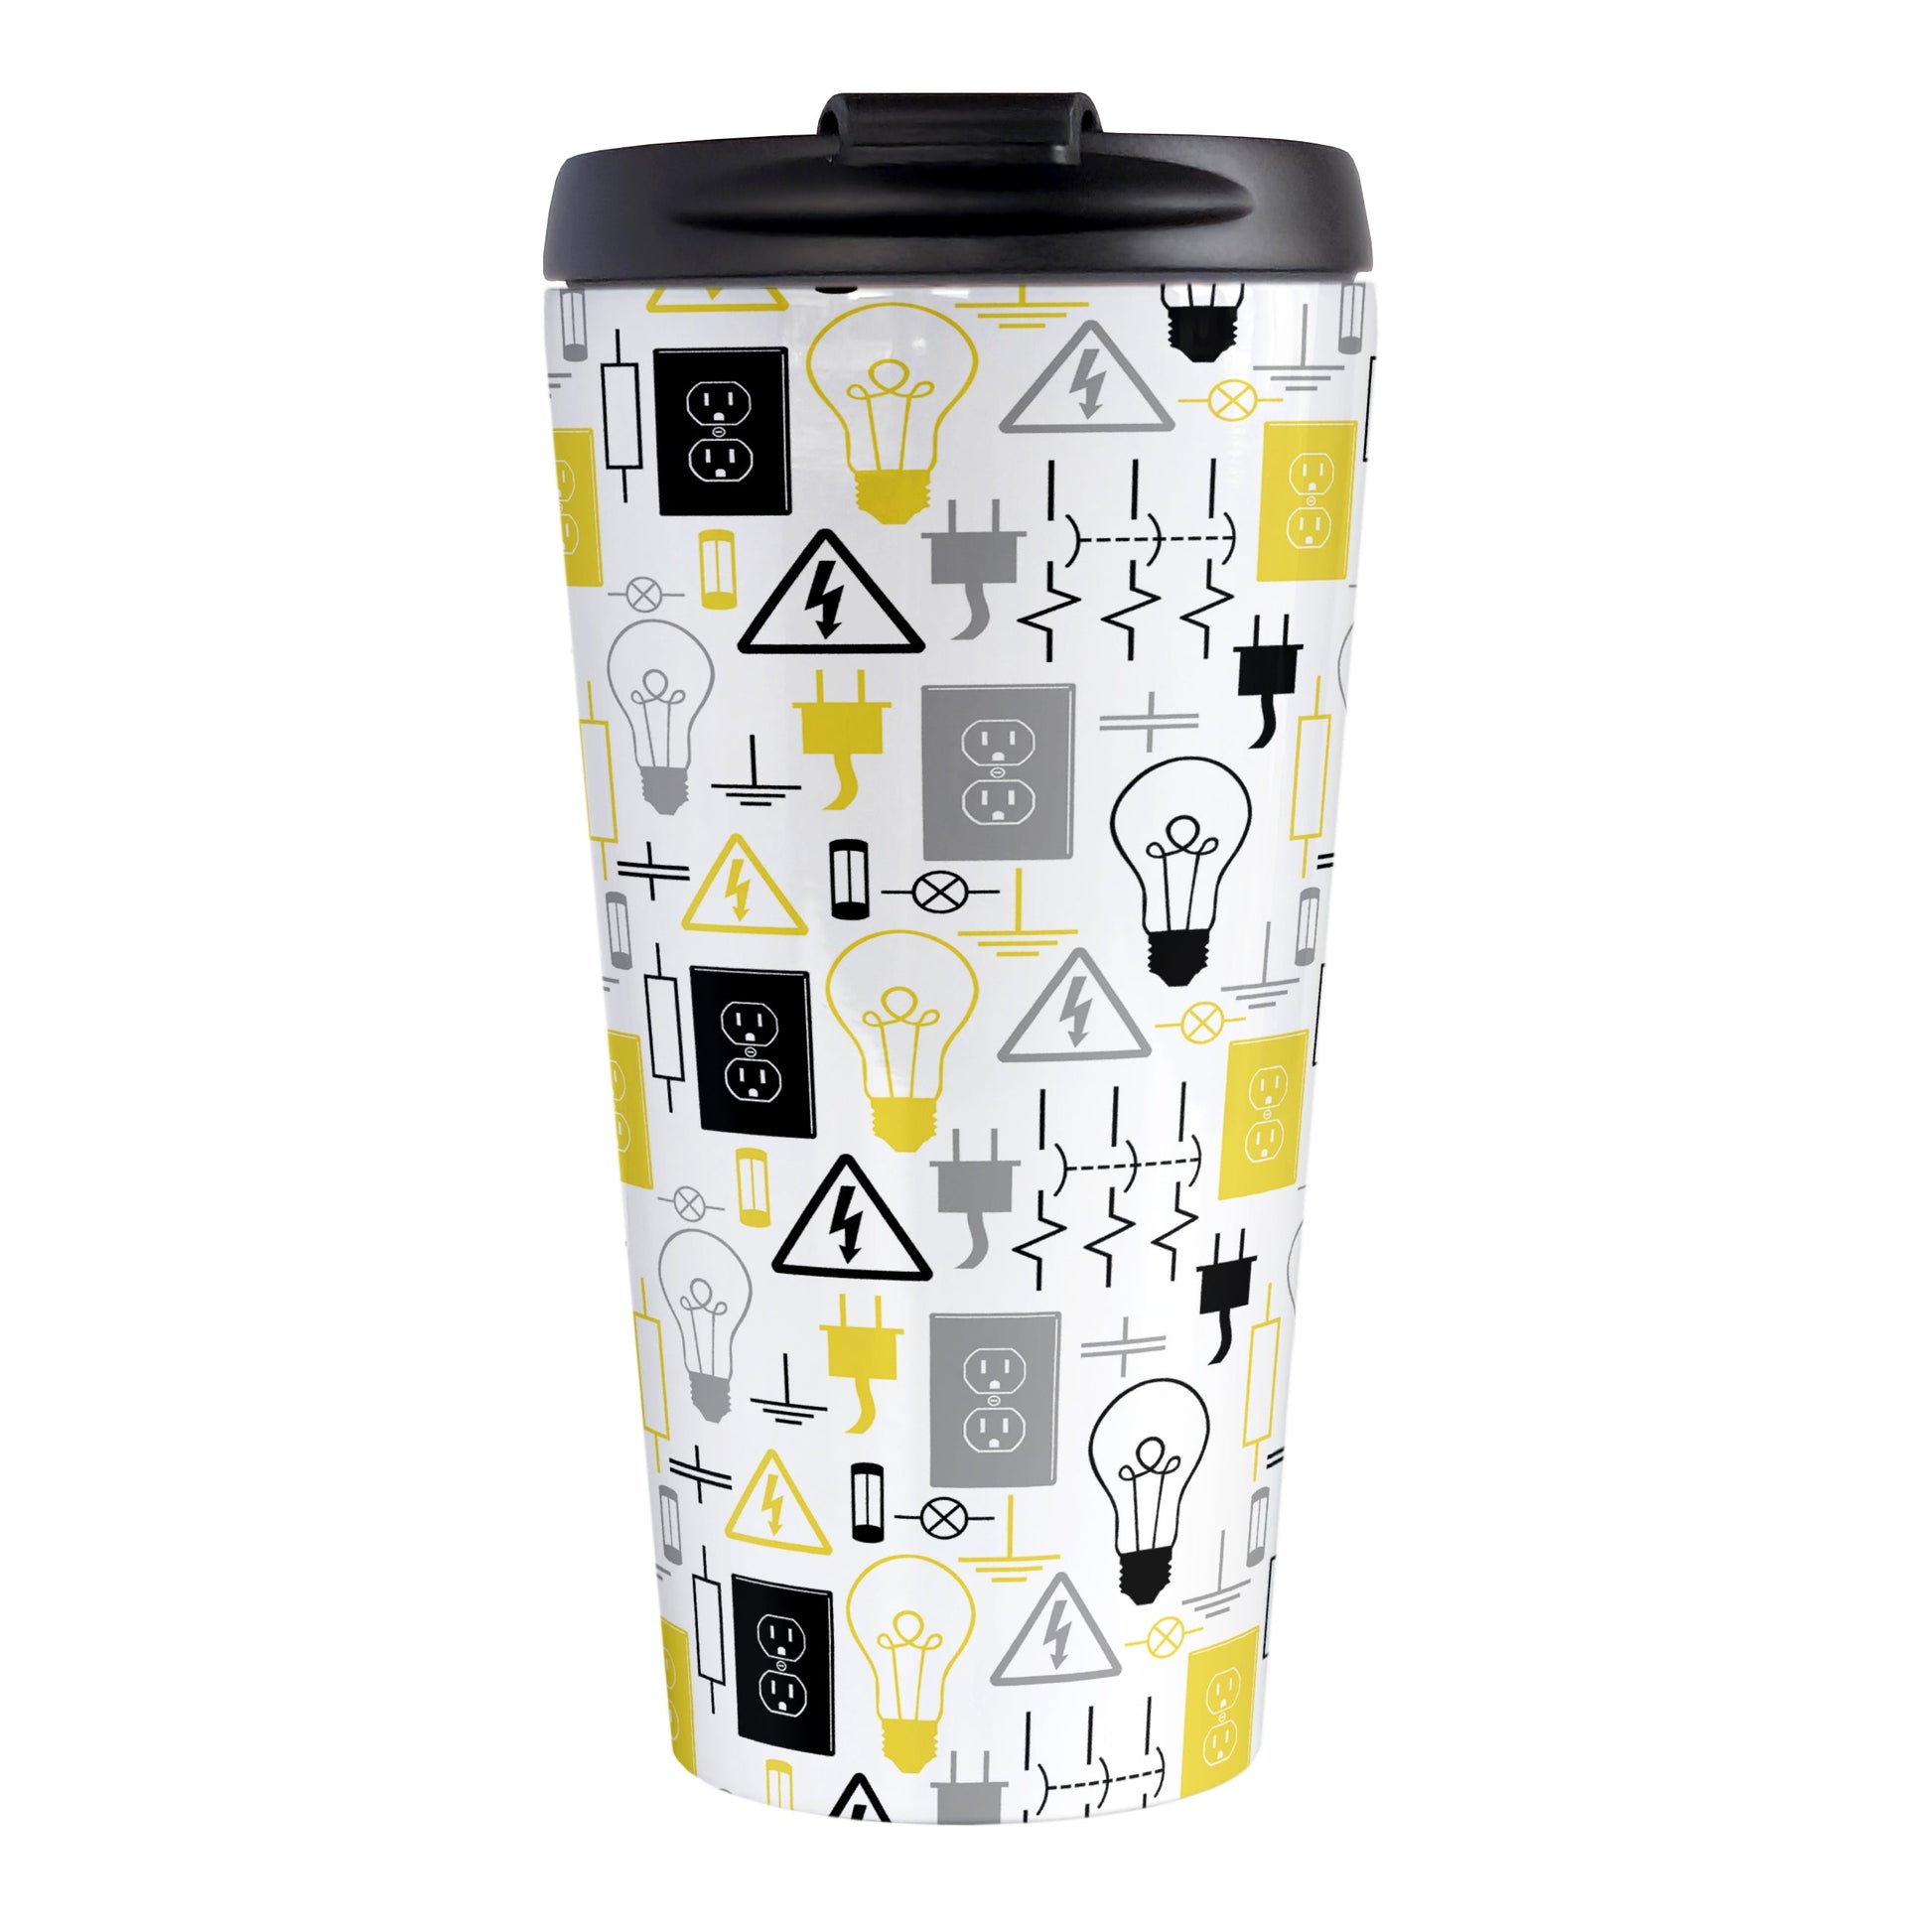 Yellow Gray Electrical Electrician Travel Mug (15oz) at Amy's Coffee Mugs. A stainless steel travel mug designed with an electrical pattern with light bulbs, wall sockets, plugs, fuses, and other electricity symbols in yellow, gray, and black colors. This travel mug is perfect for people who work a trade as an electrician or love working with electronics. 